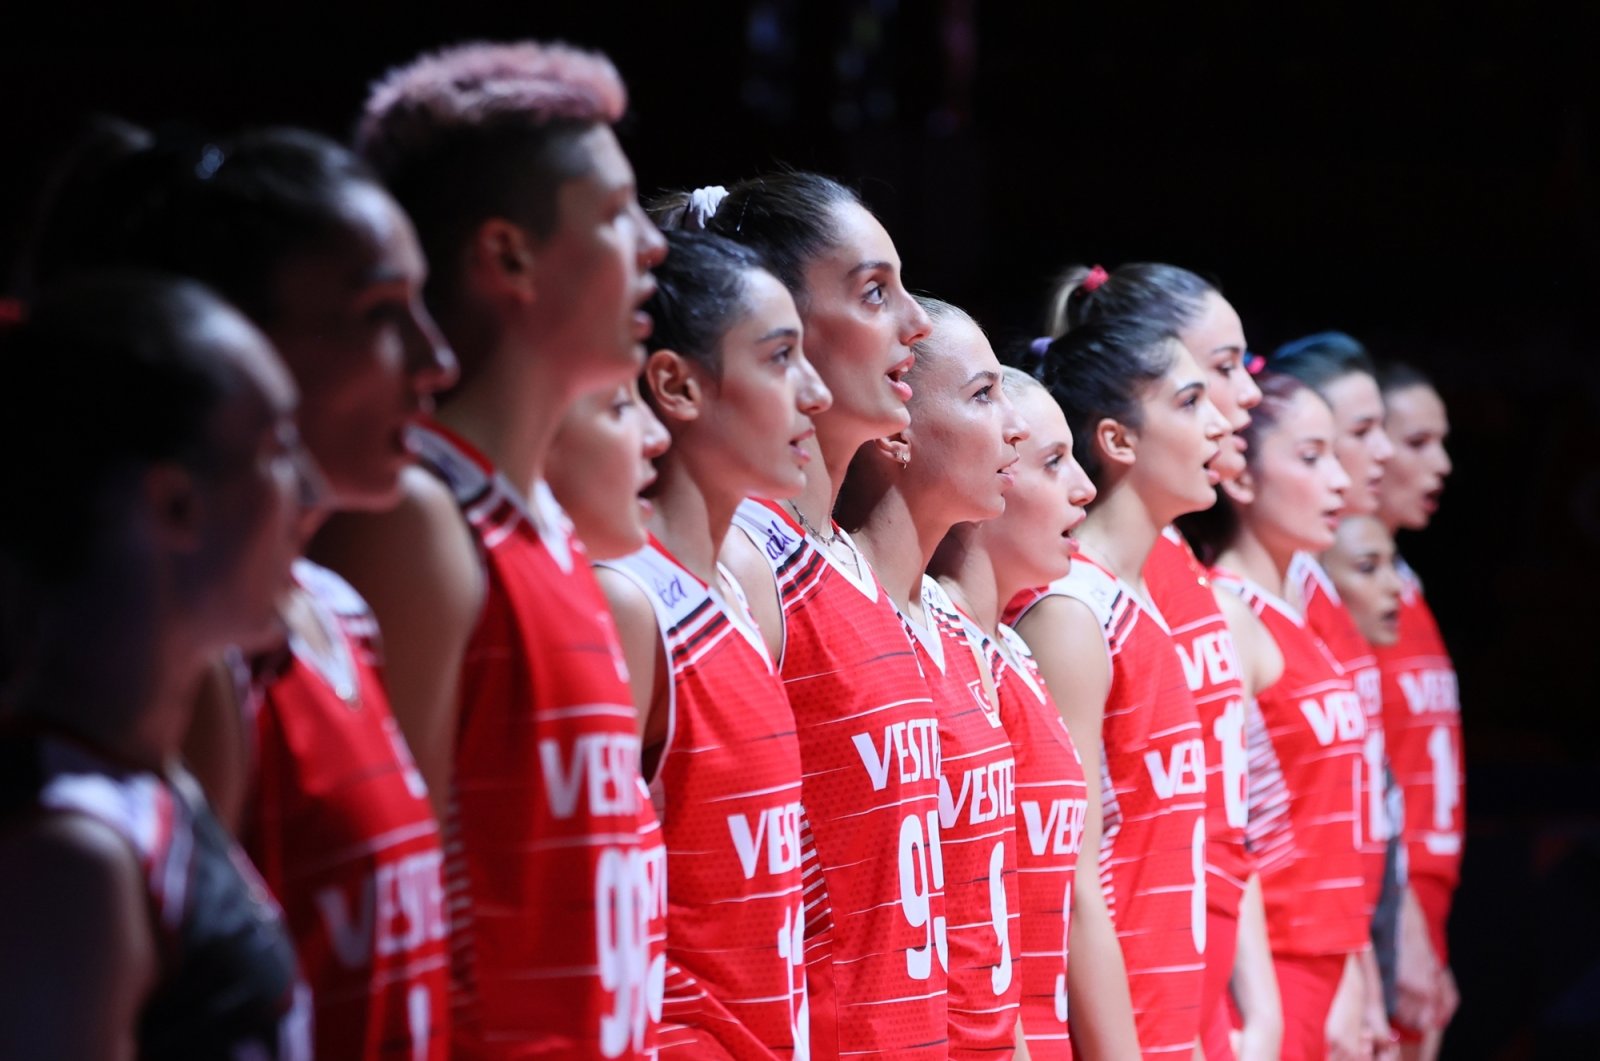 Turkey women's national volleyball team players prior to their 2021 EuroVolley quarterfinal against Poland at the Kolodruma Sports Hall in Plovdiv, Bulgaria, Aug. 31, 2021.